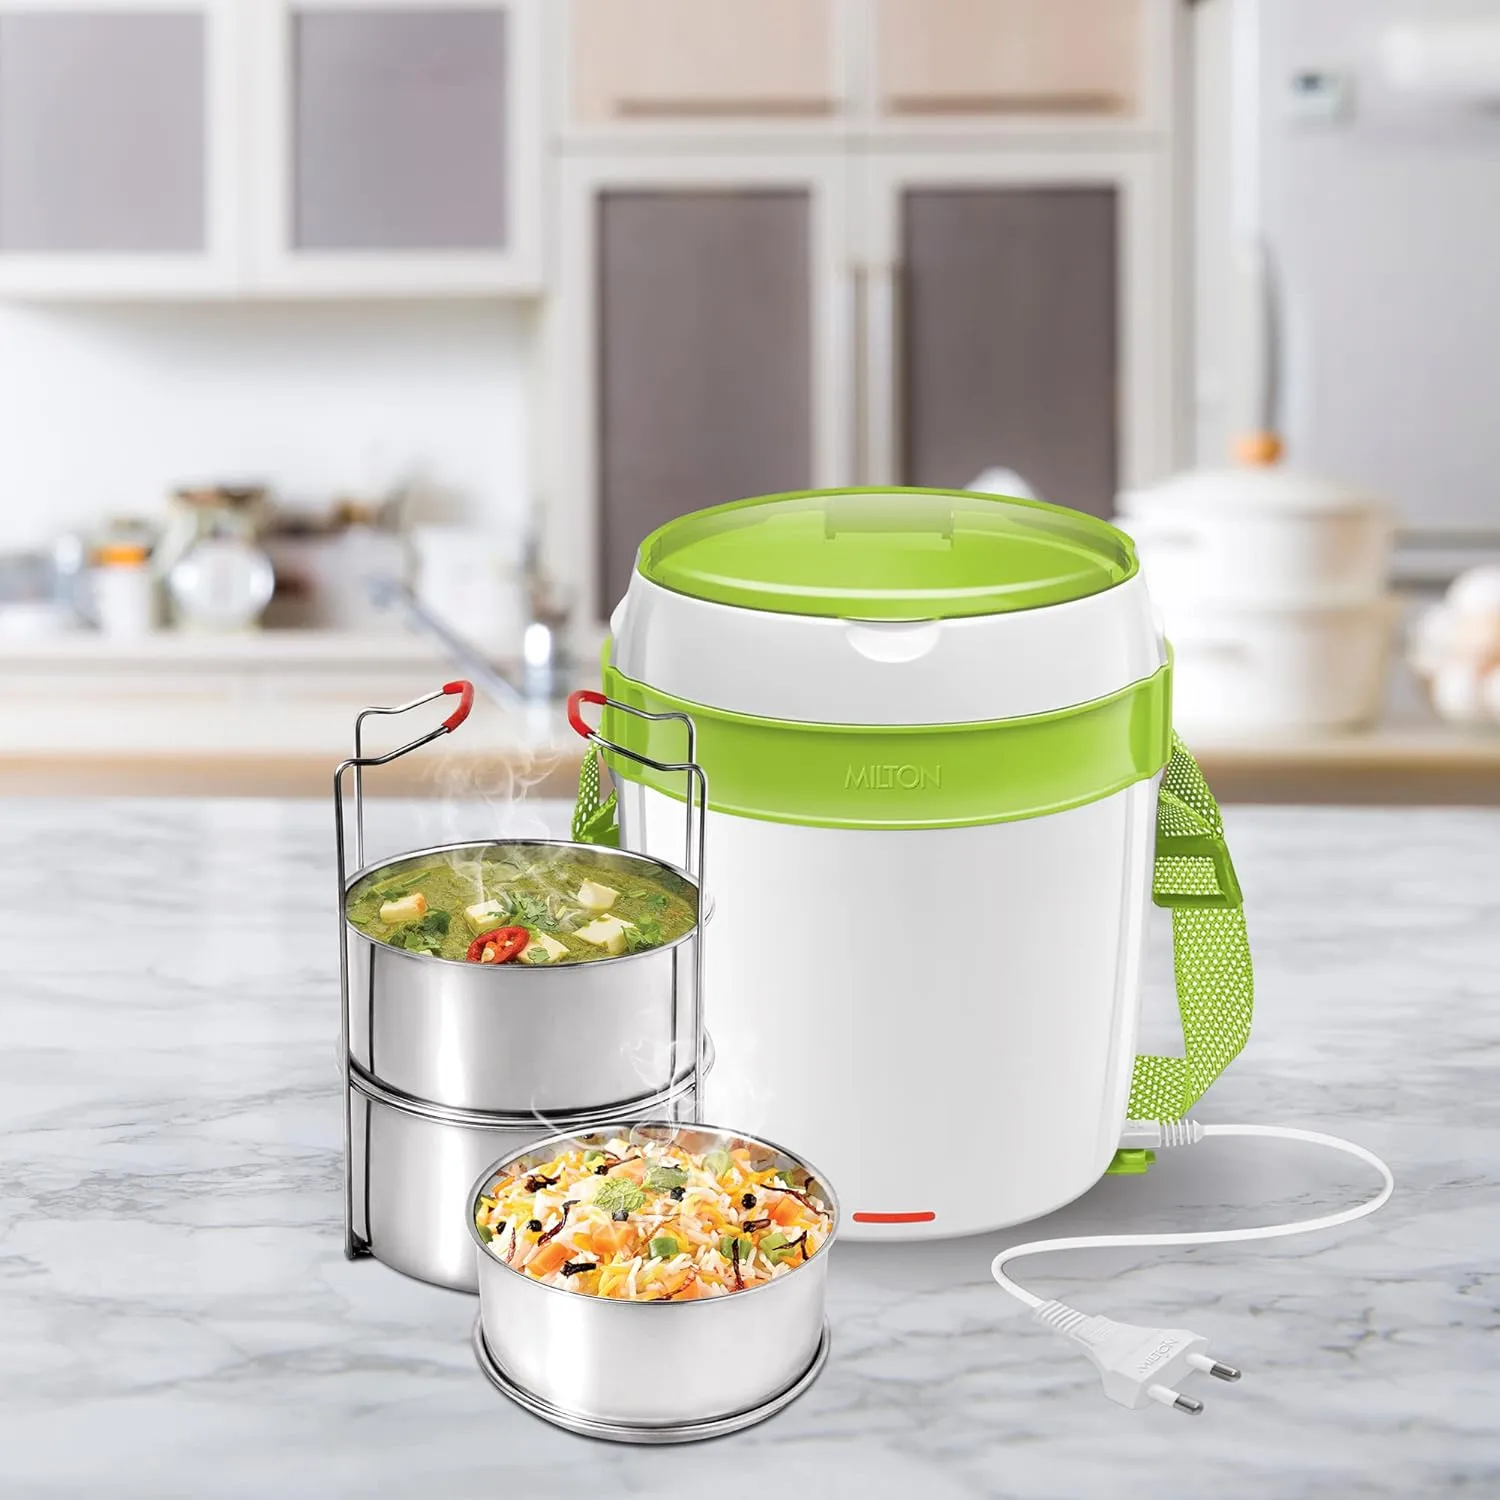 Electric Lunch Box - Electric Tiffin Box - Modern Mealtime Convenience